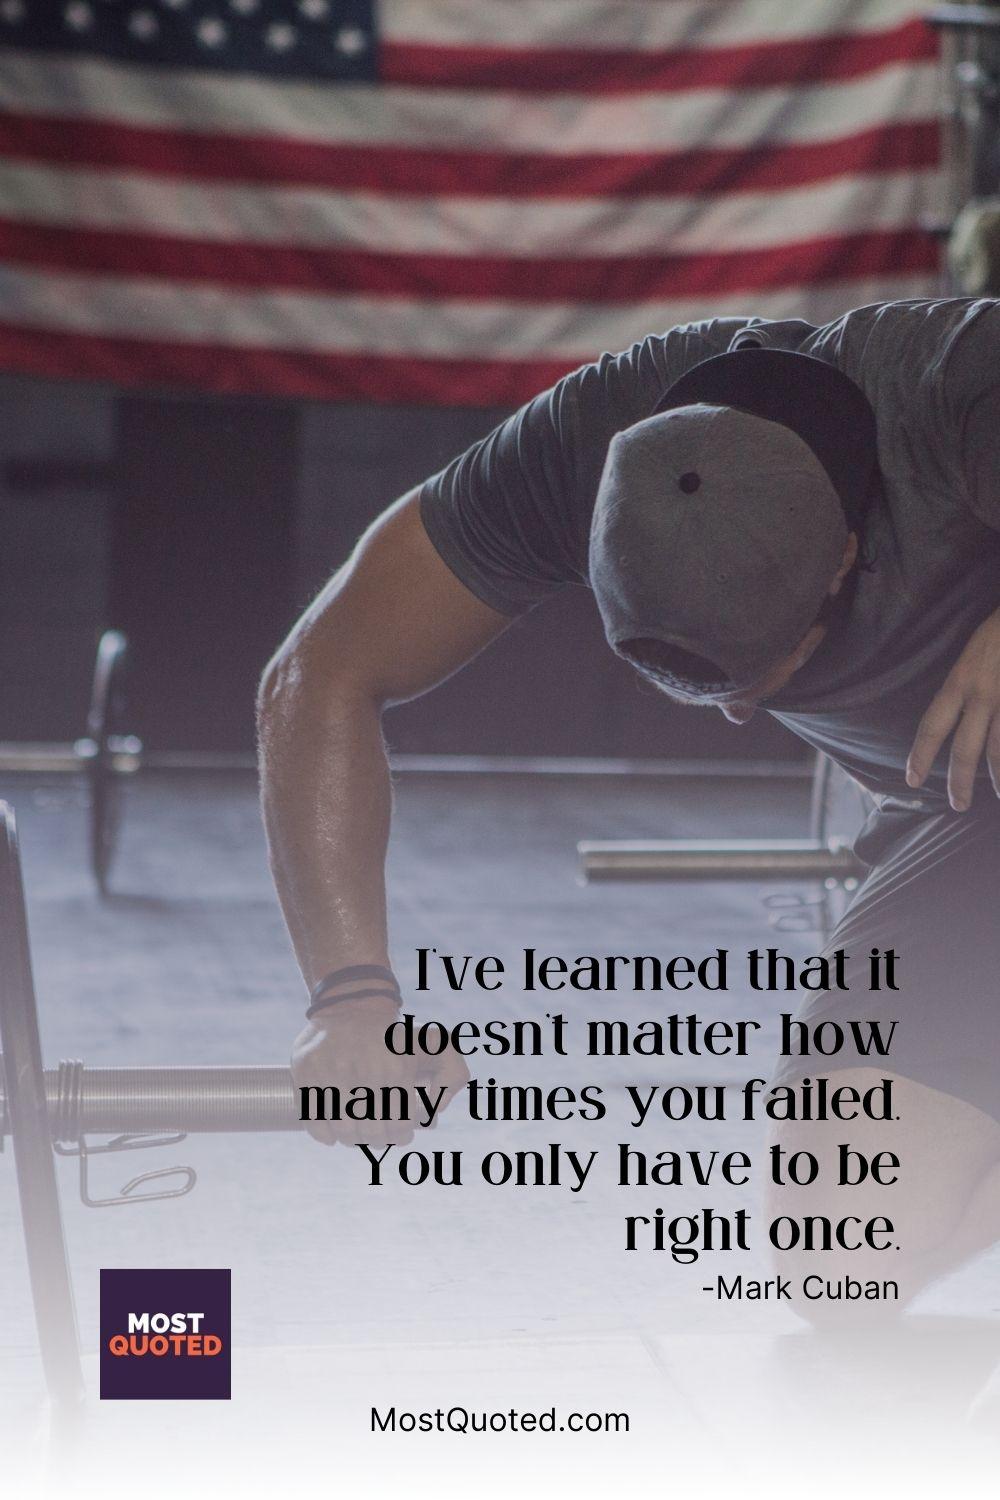 I’ve learned that it doesn’t matter how many times you failed. You only have to be right once. - Mark Cuban